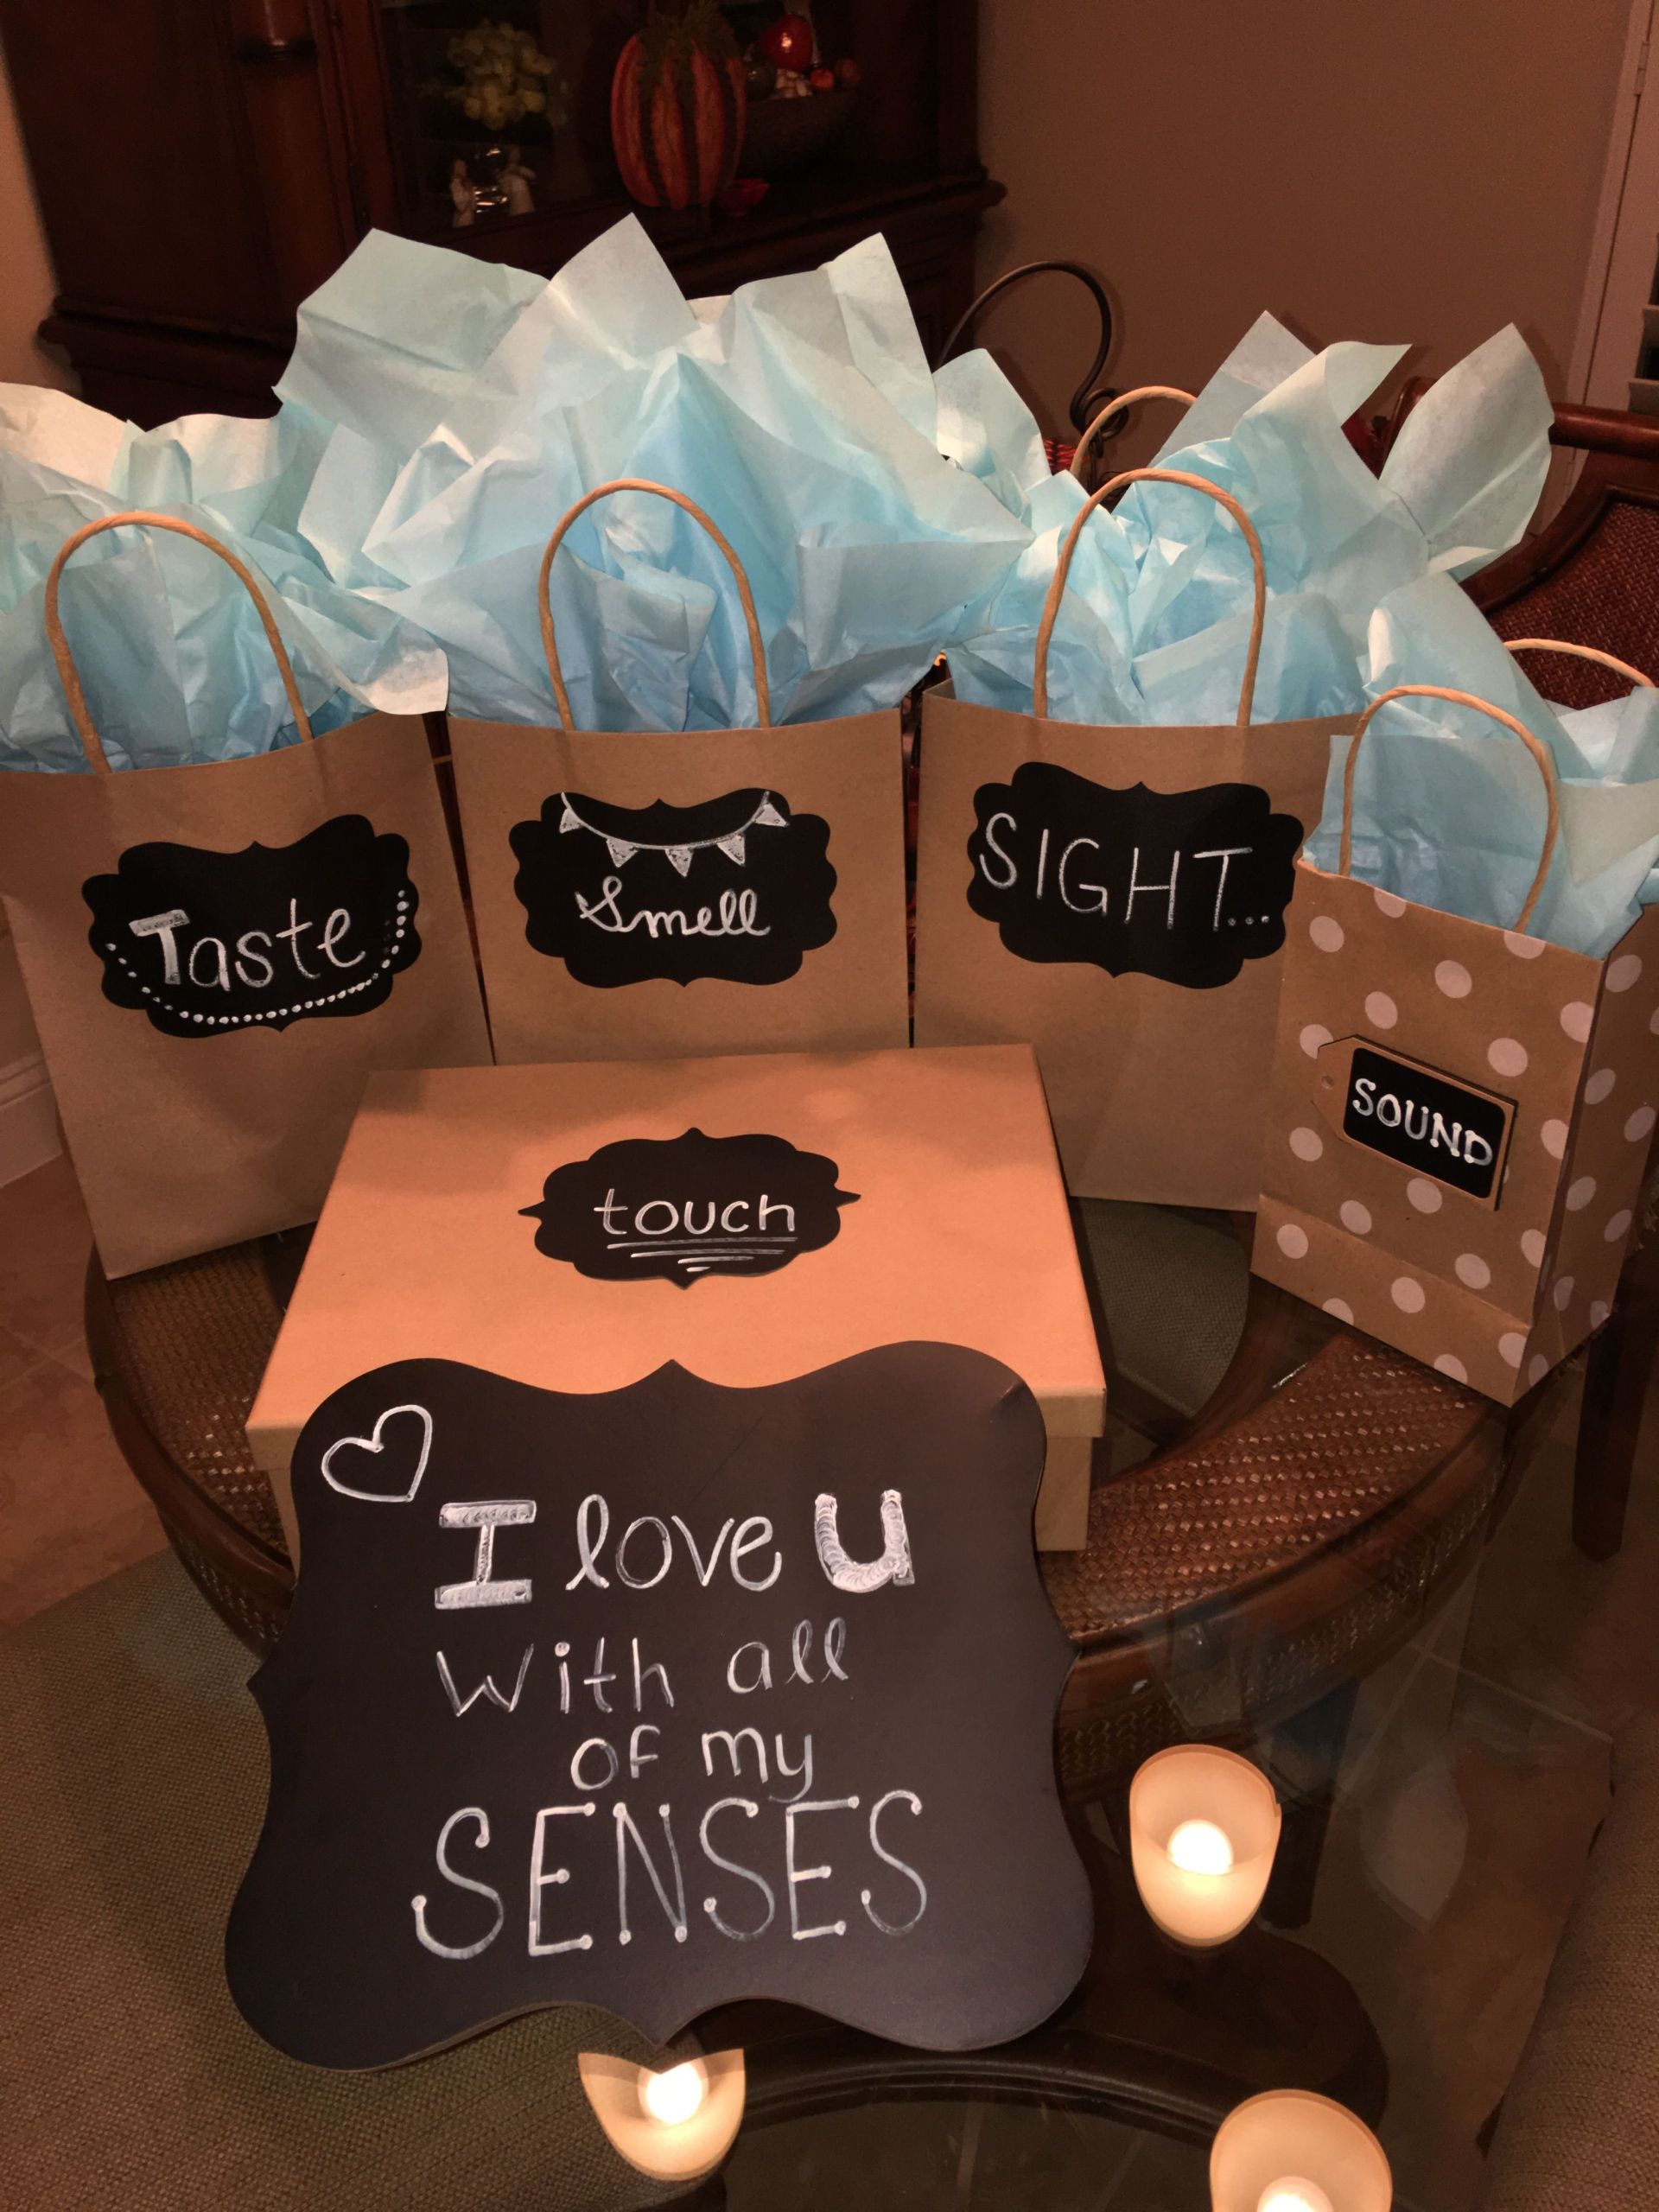 Birthday Gift Ideas For Boyfriends
 I love you with all of my senses my version for my